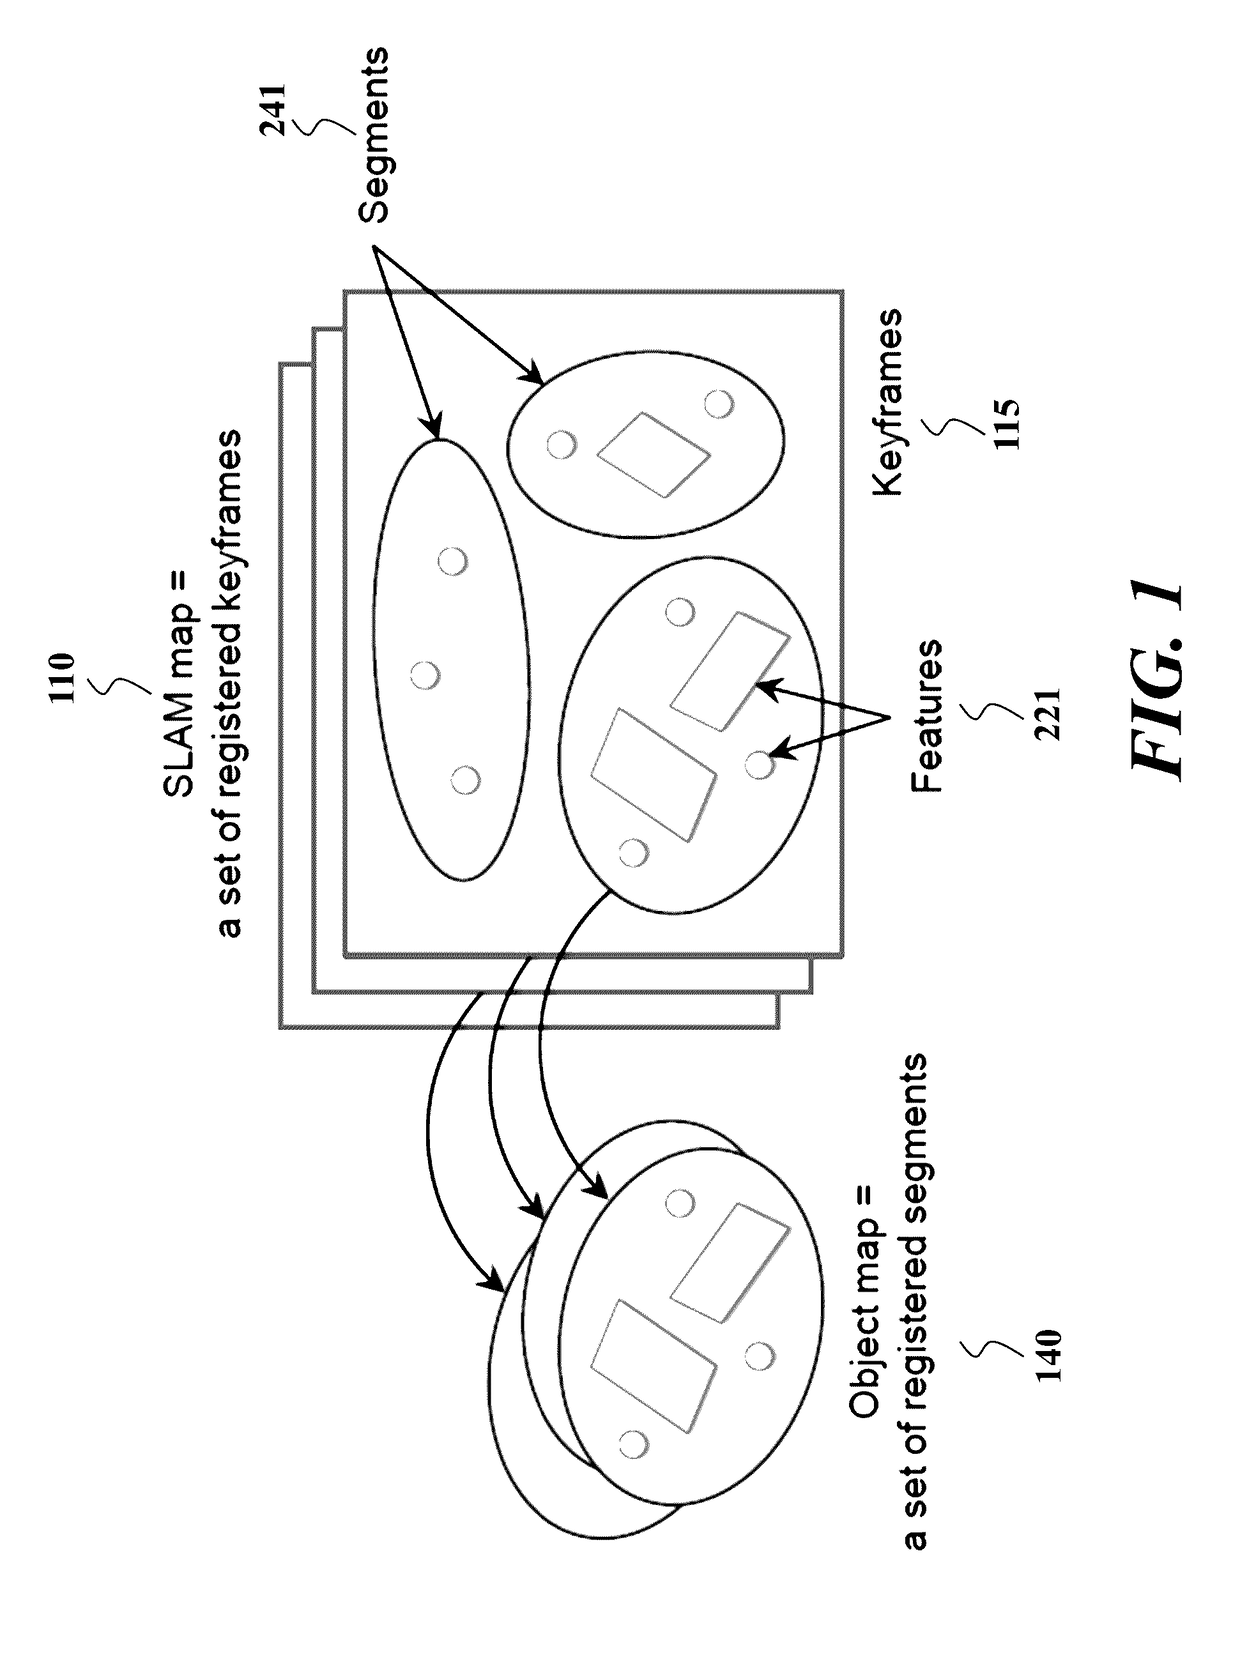 Method and System for Detecting and Tracking Objects and SLAM with Hierarchical Feature Grouping